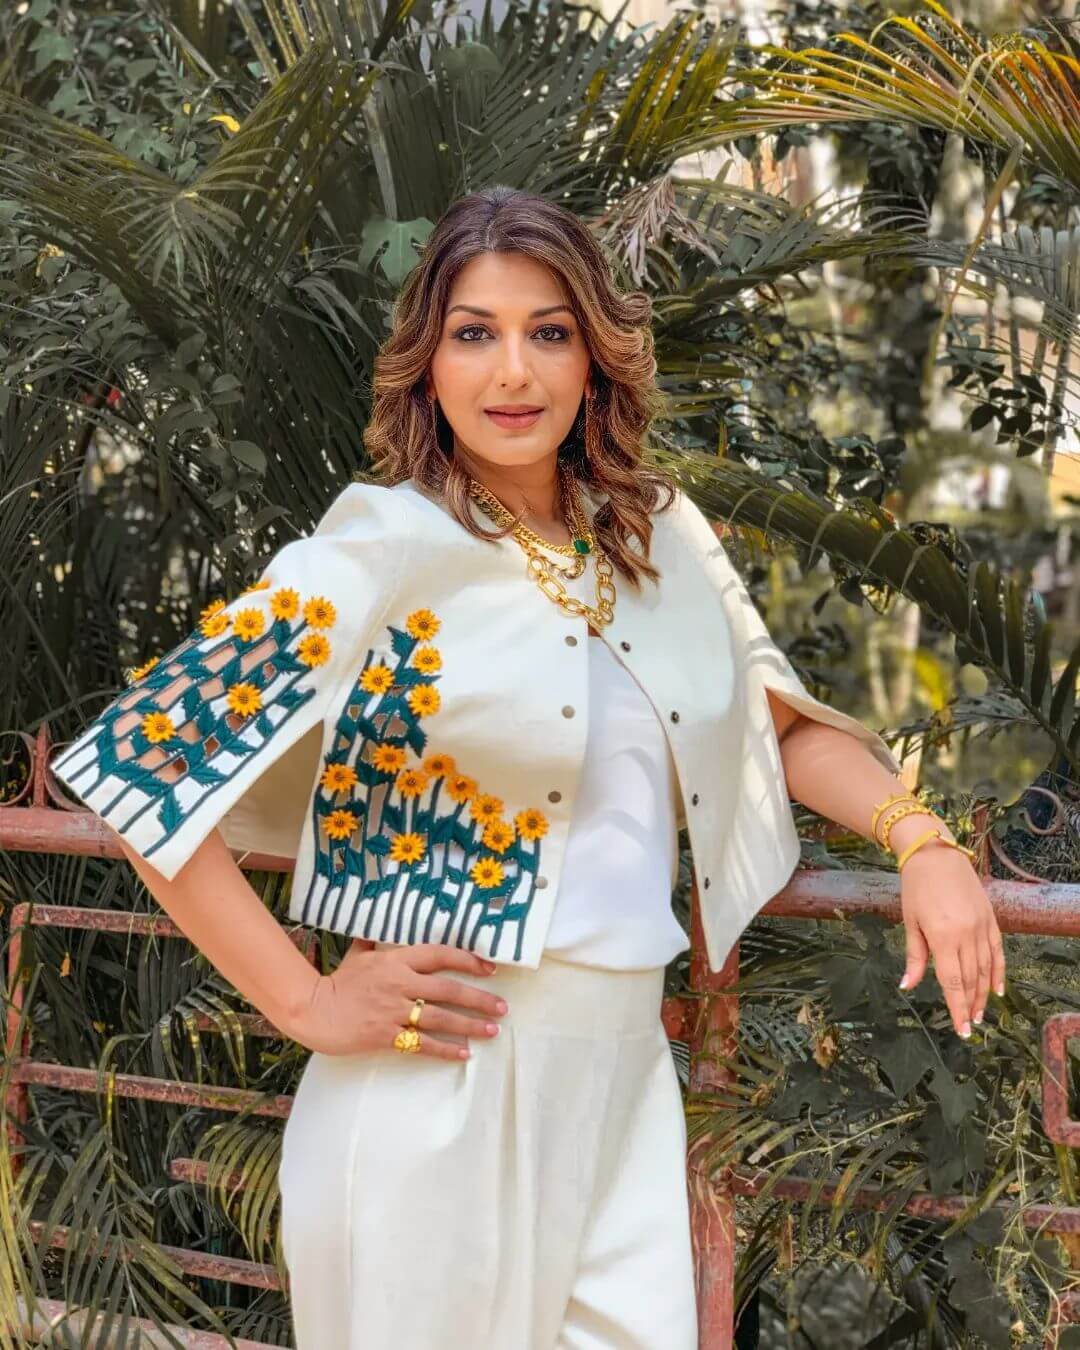 Actress Sonali Bendre in stylish white outfit